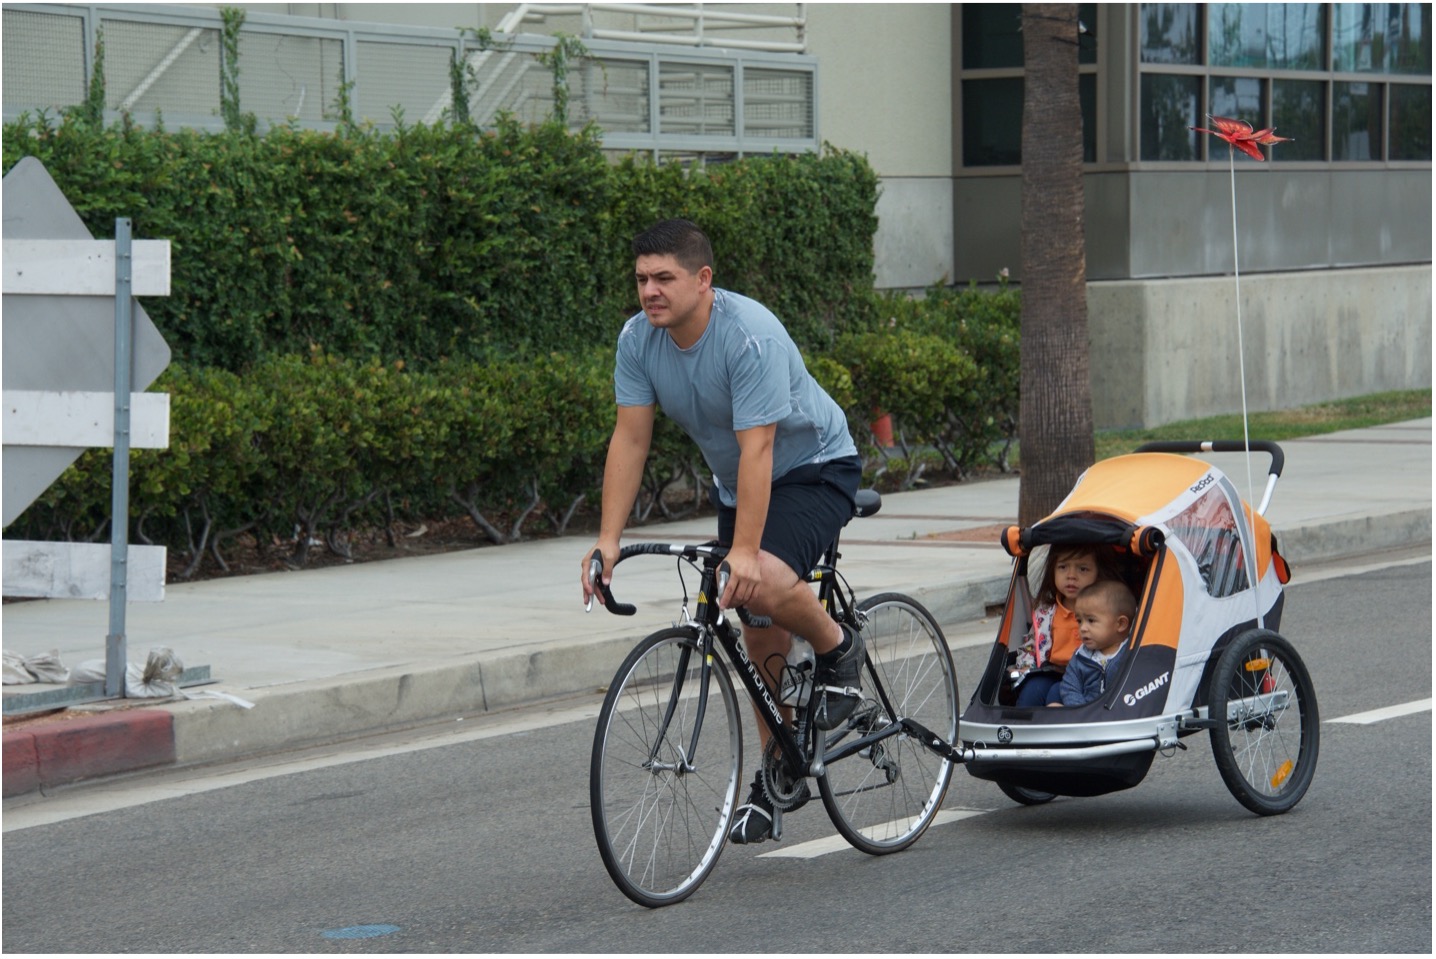 man riding a bike with a trailer containing two children